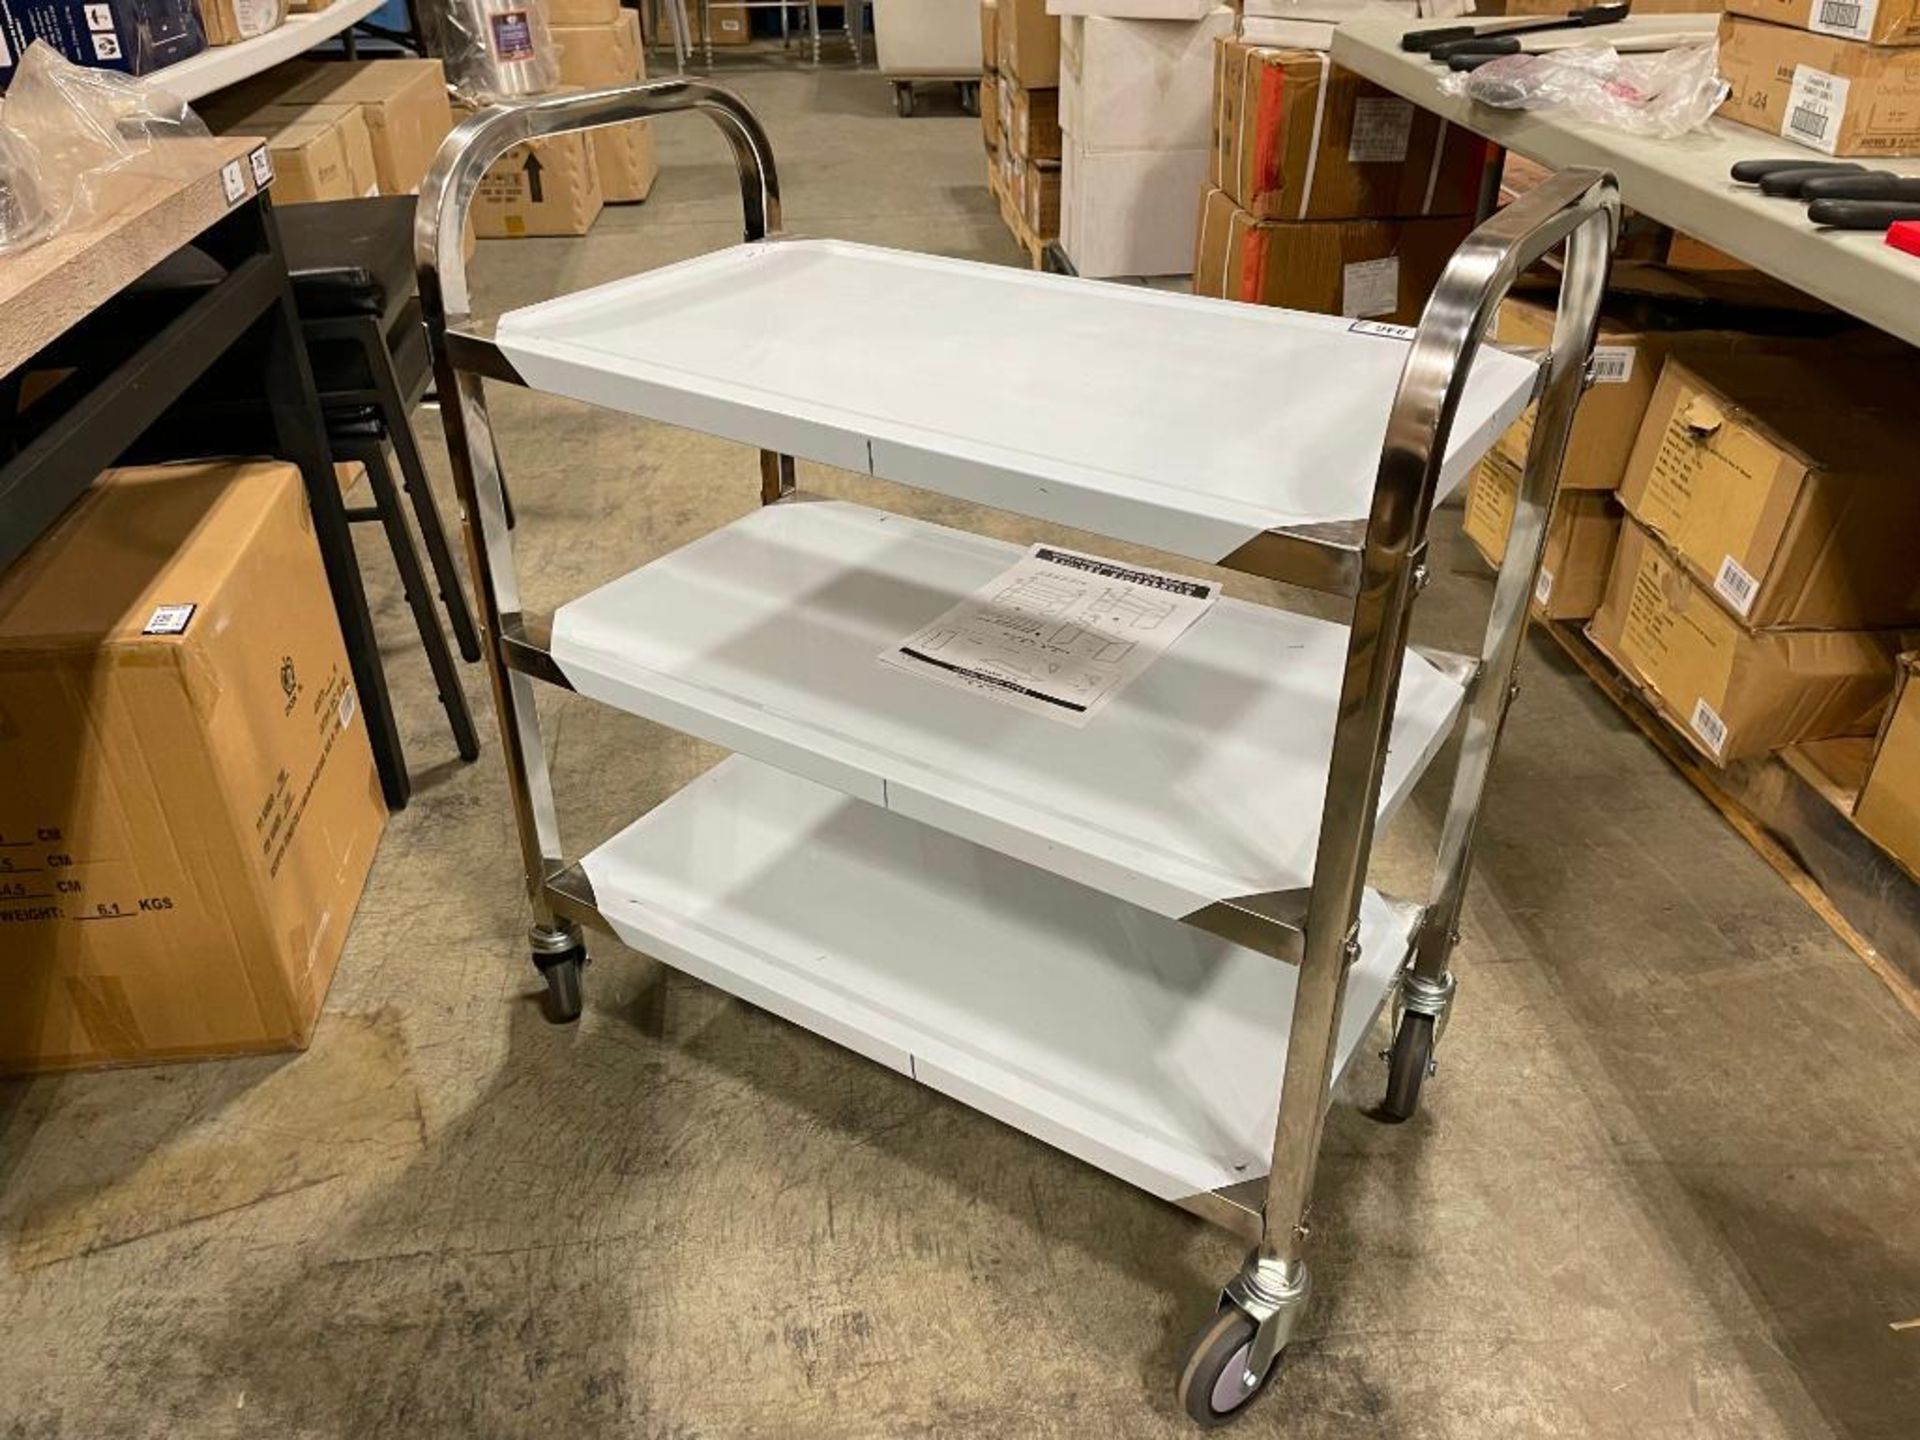 27" X 15" STAINLESS STEEL 3 TIER BUSSING CART - NEW - OMCAN 24418 - Image 4 of 5